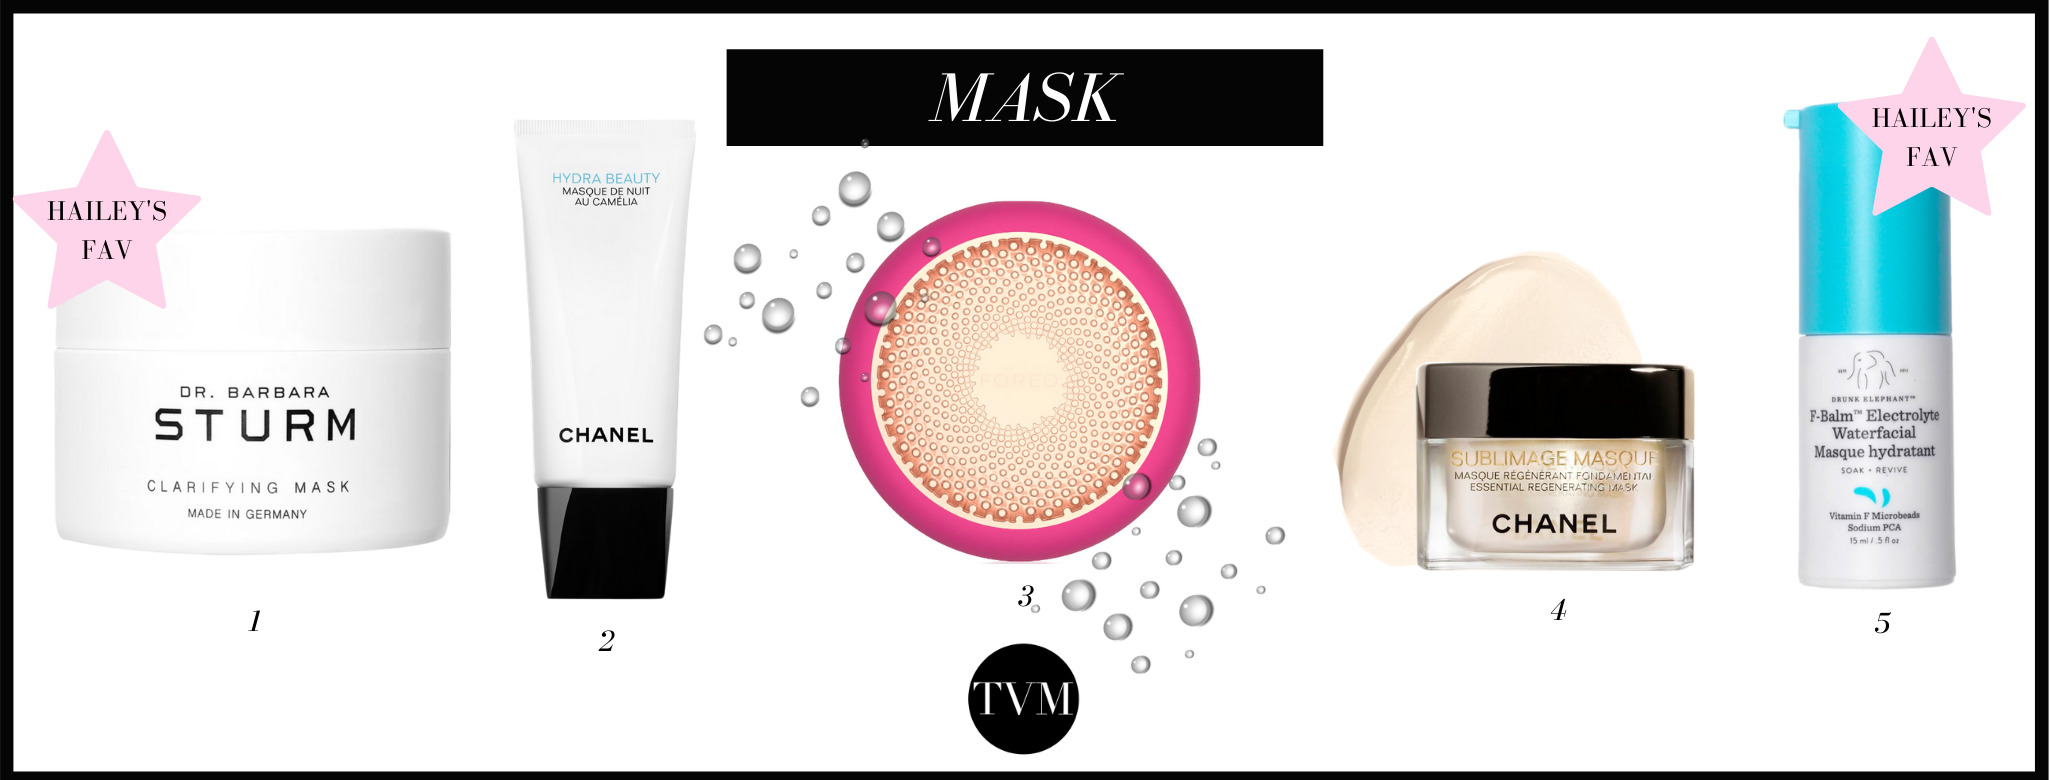 With a super clean face, she spends about 10 minutes on a moisturising mask and an under-eye mask. Hailey's favourite masks are both Dr Barbara Sturm clarifying mask (1) and Drunk Elephant F- Balm Electrolyte Waterfacial Masque Hydratant (5).  To give you more options, I recommend the Hydra Beauty Mask of Nut and Camelia from Chanel (2) to moisturise your skin. If you have mature skin I think the Sublimage Masque (4), also from Chanel, is a way to go!  For those tech and efficient women, I highly recommend the  UFO Foreo device (3)! 